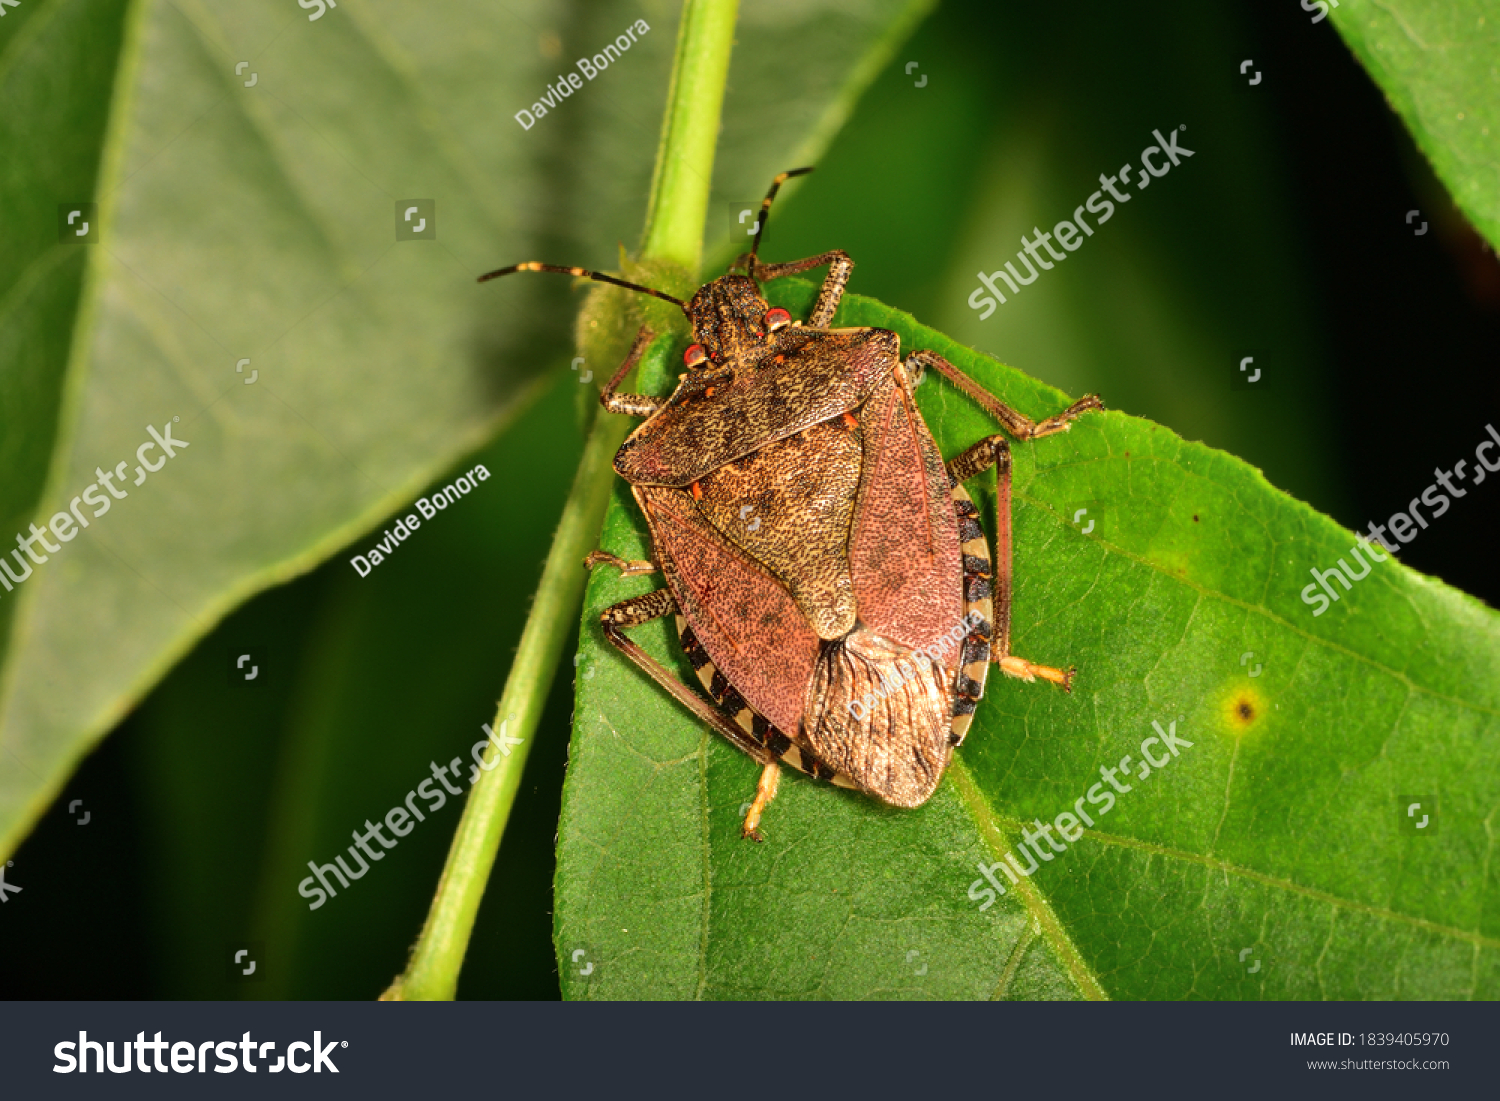 Macro image in natural light of isolated specimen of Brown marmorated stink bug, scientific name Halyomorpha halys, photographed on a green leaf with natural background. #1839405970